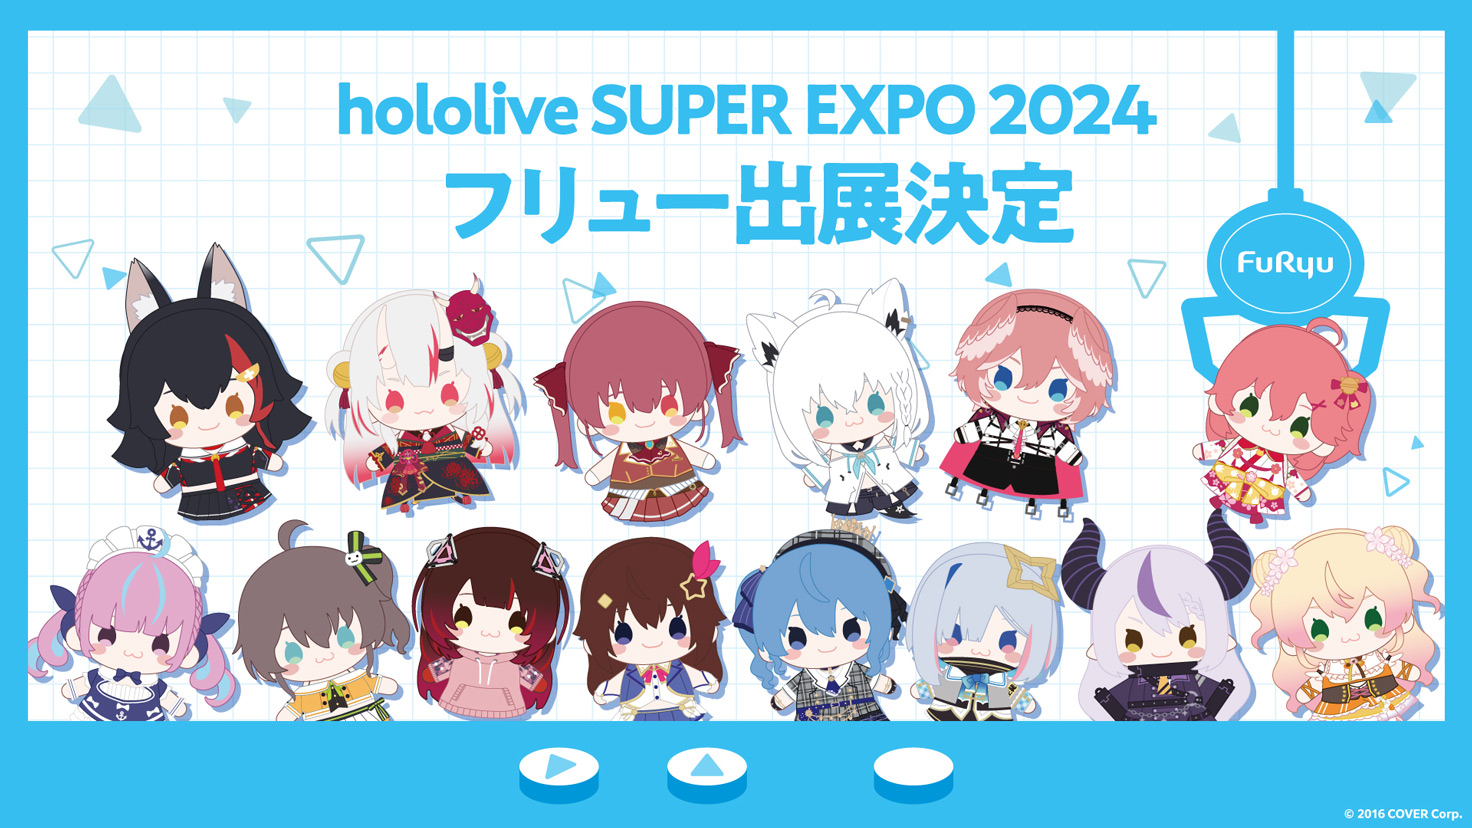 hololive SUPER EXPO 2024 フリュー出展決定